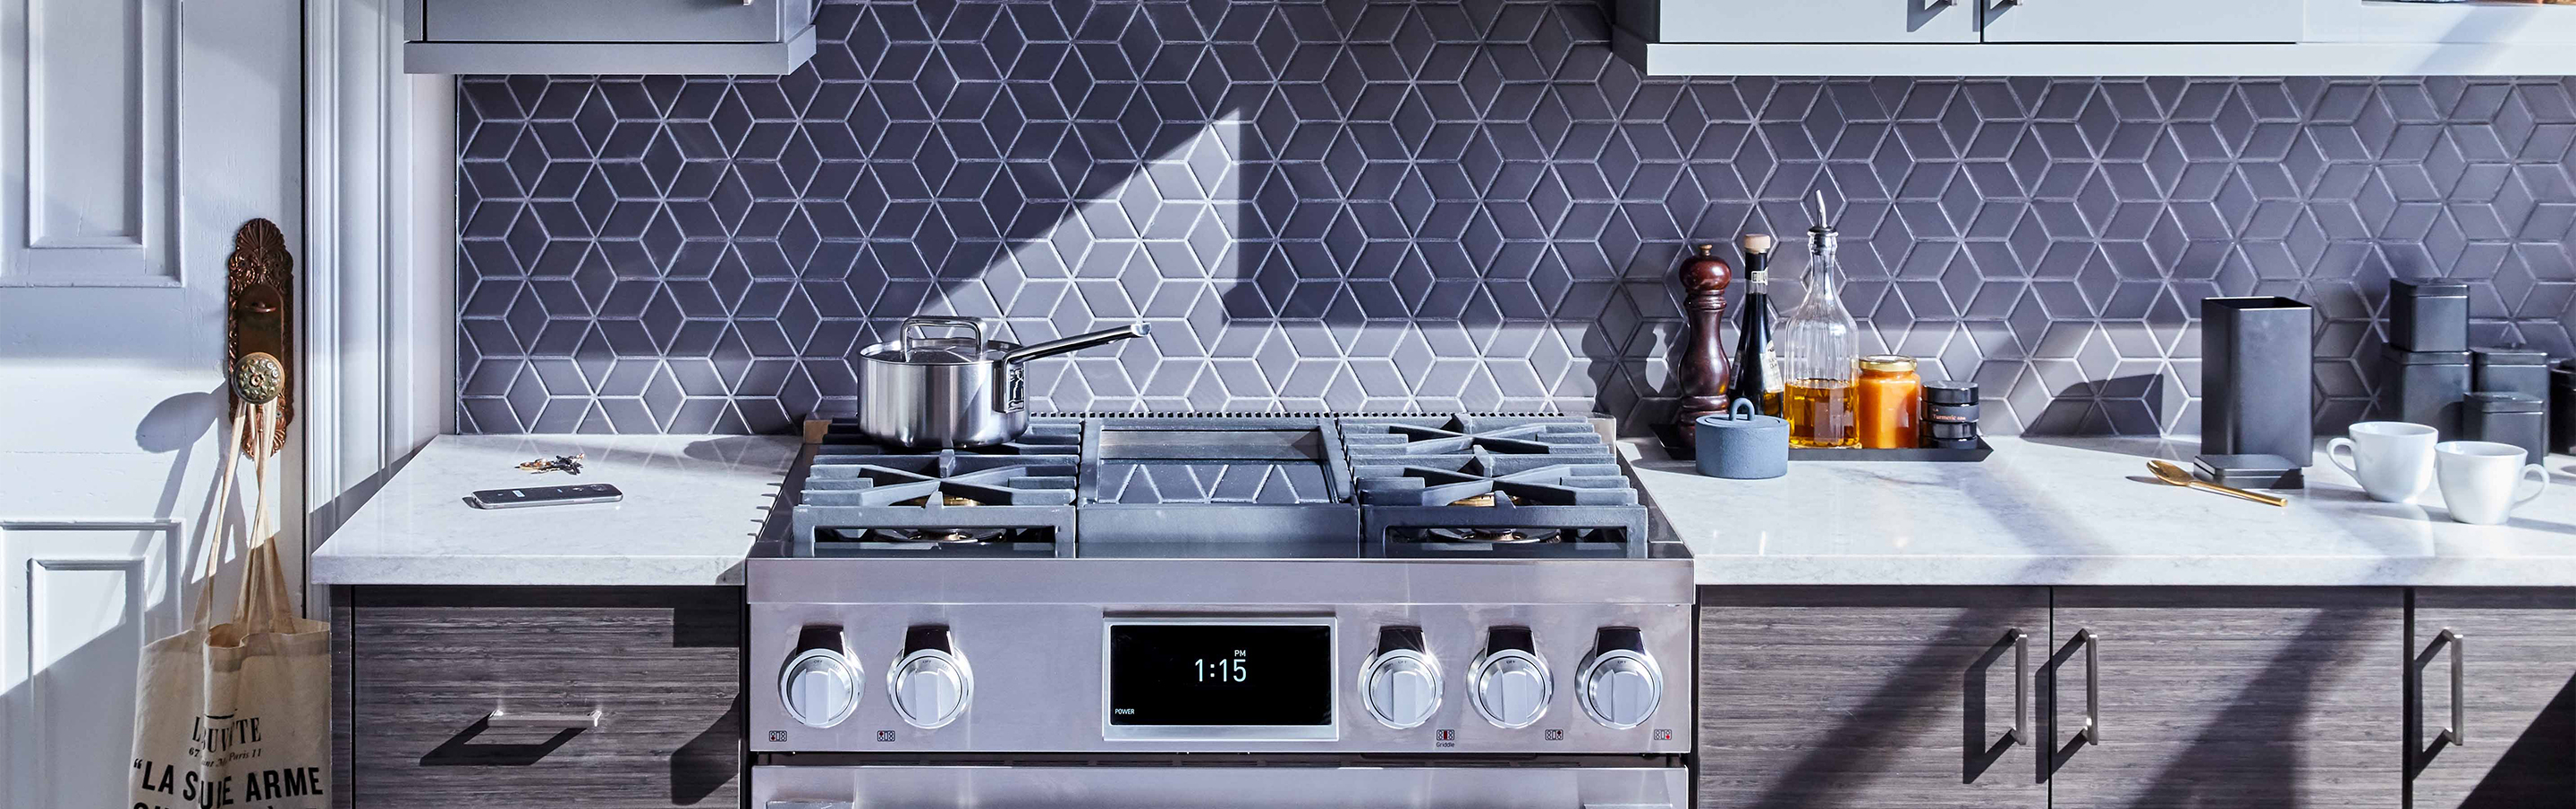 36-inch Pro Range  with Chromium Griddle by Signature Kitchen Suite 